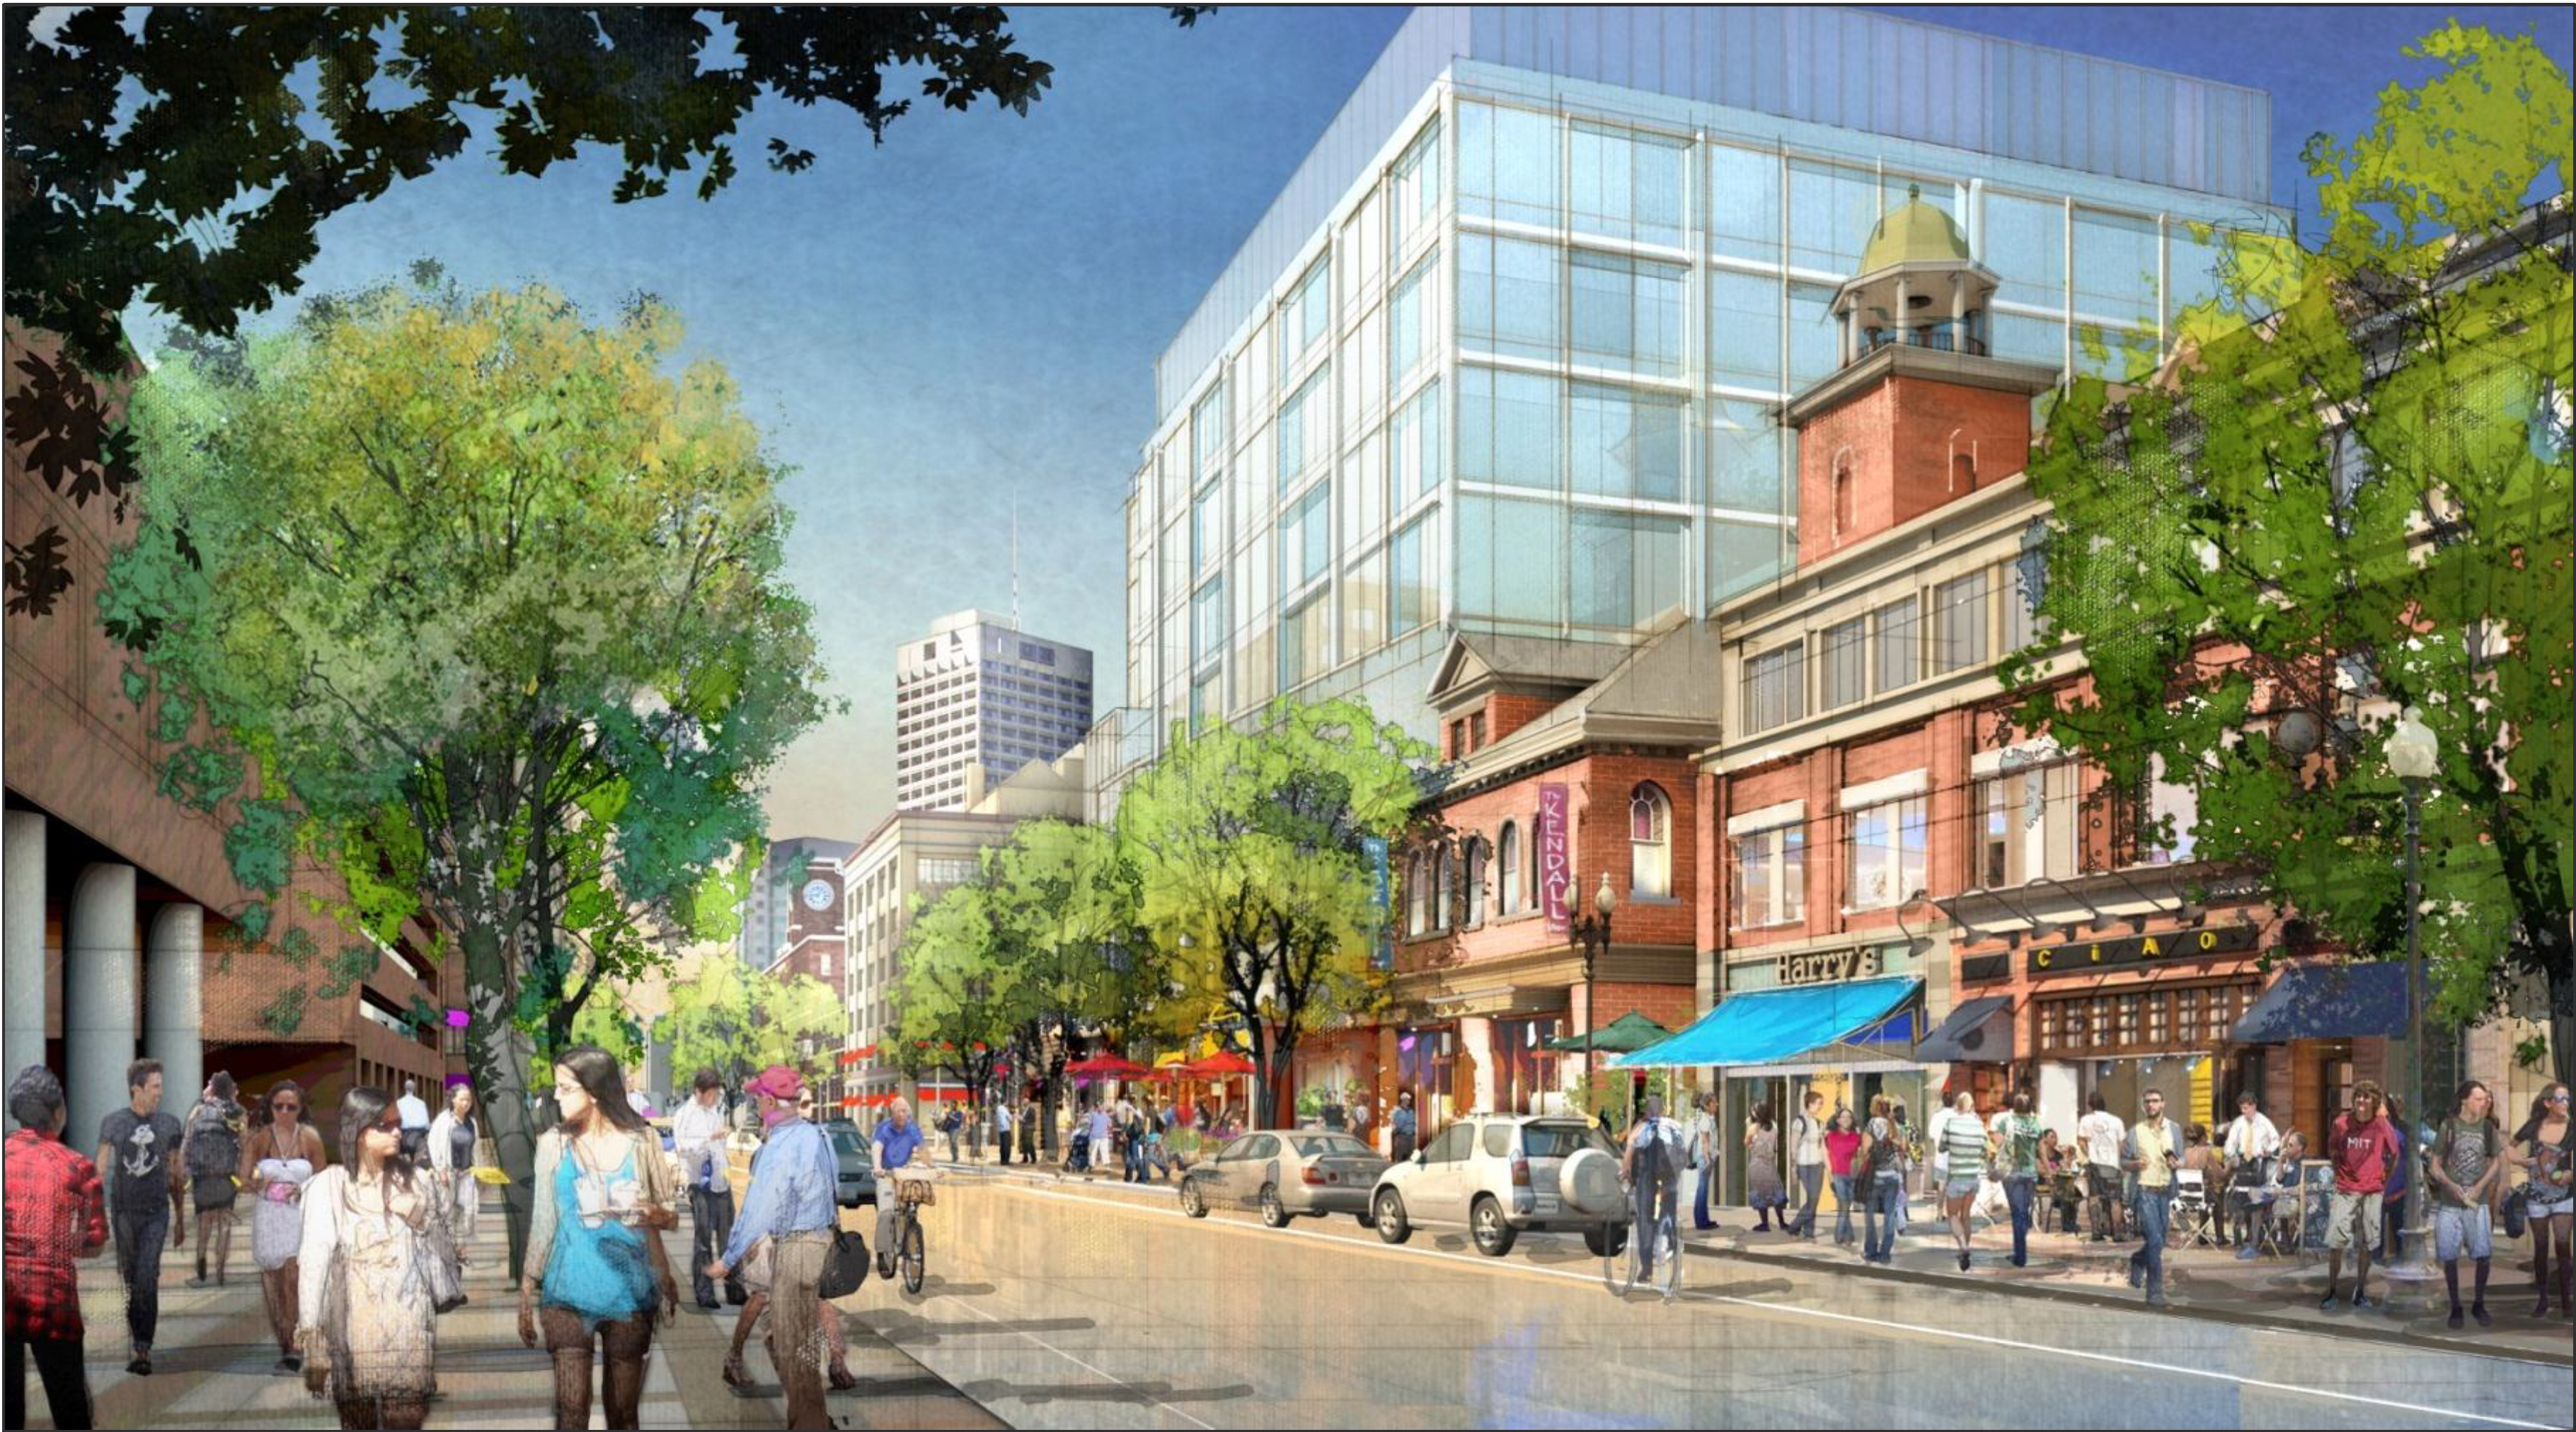 Artist's rendering of a redeveloped Main st., as viewed from the intersection with Ames st.  Courtesy MIT